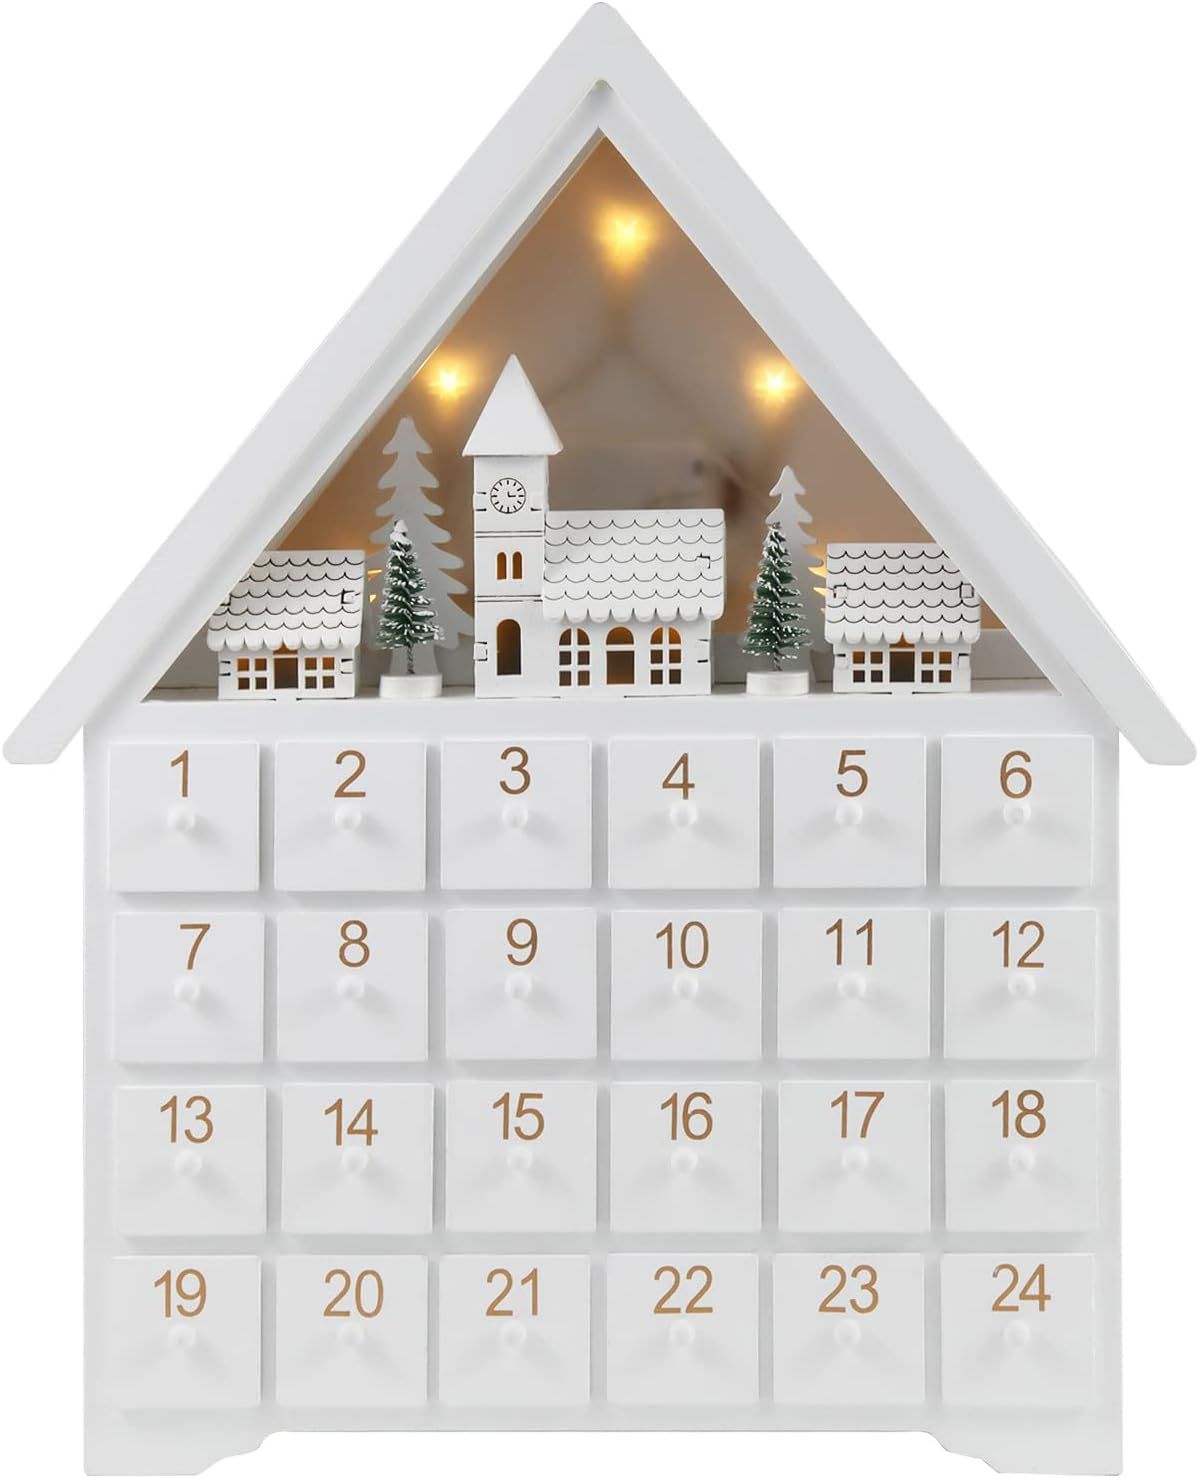 XINSO Wooden Christmas Advent Calendar House with 24 Drawers for Kids,Countdown to Christmas,LED ... | Amazon (US)